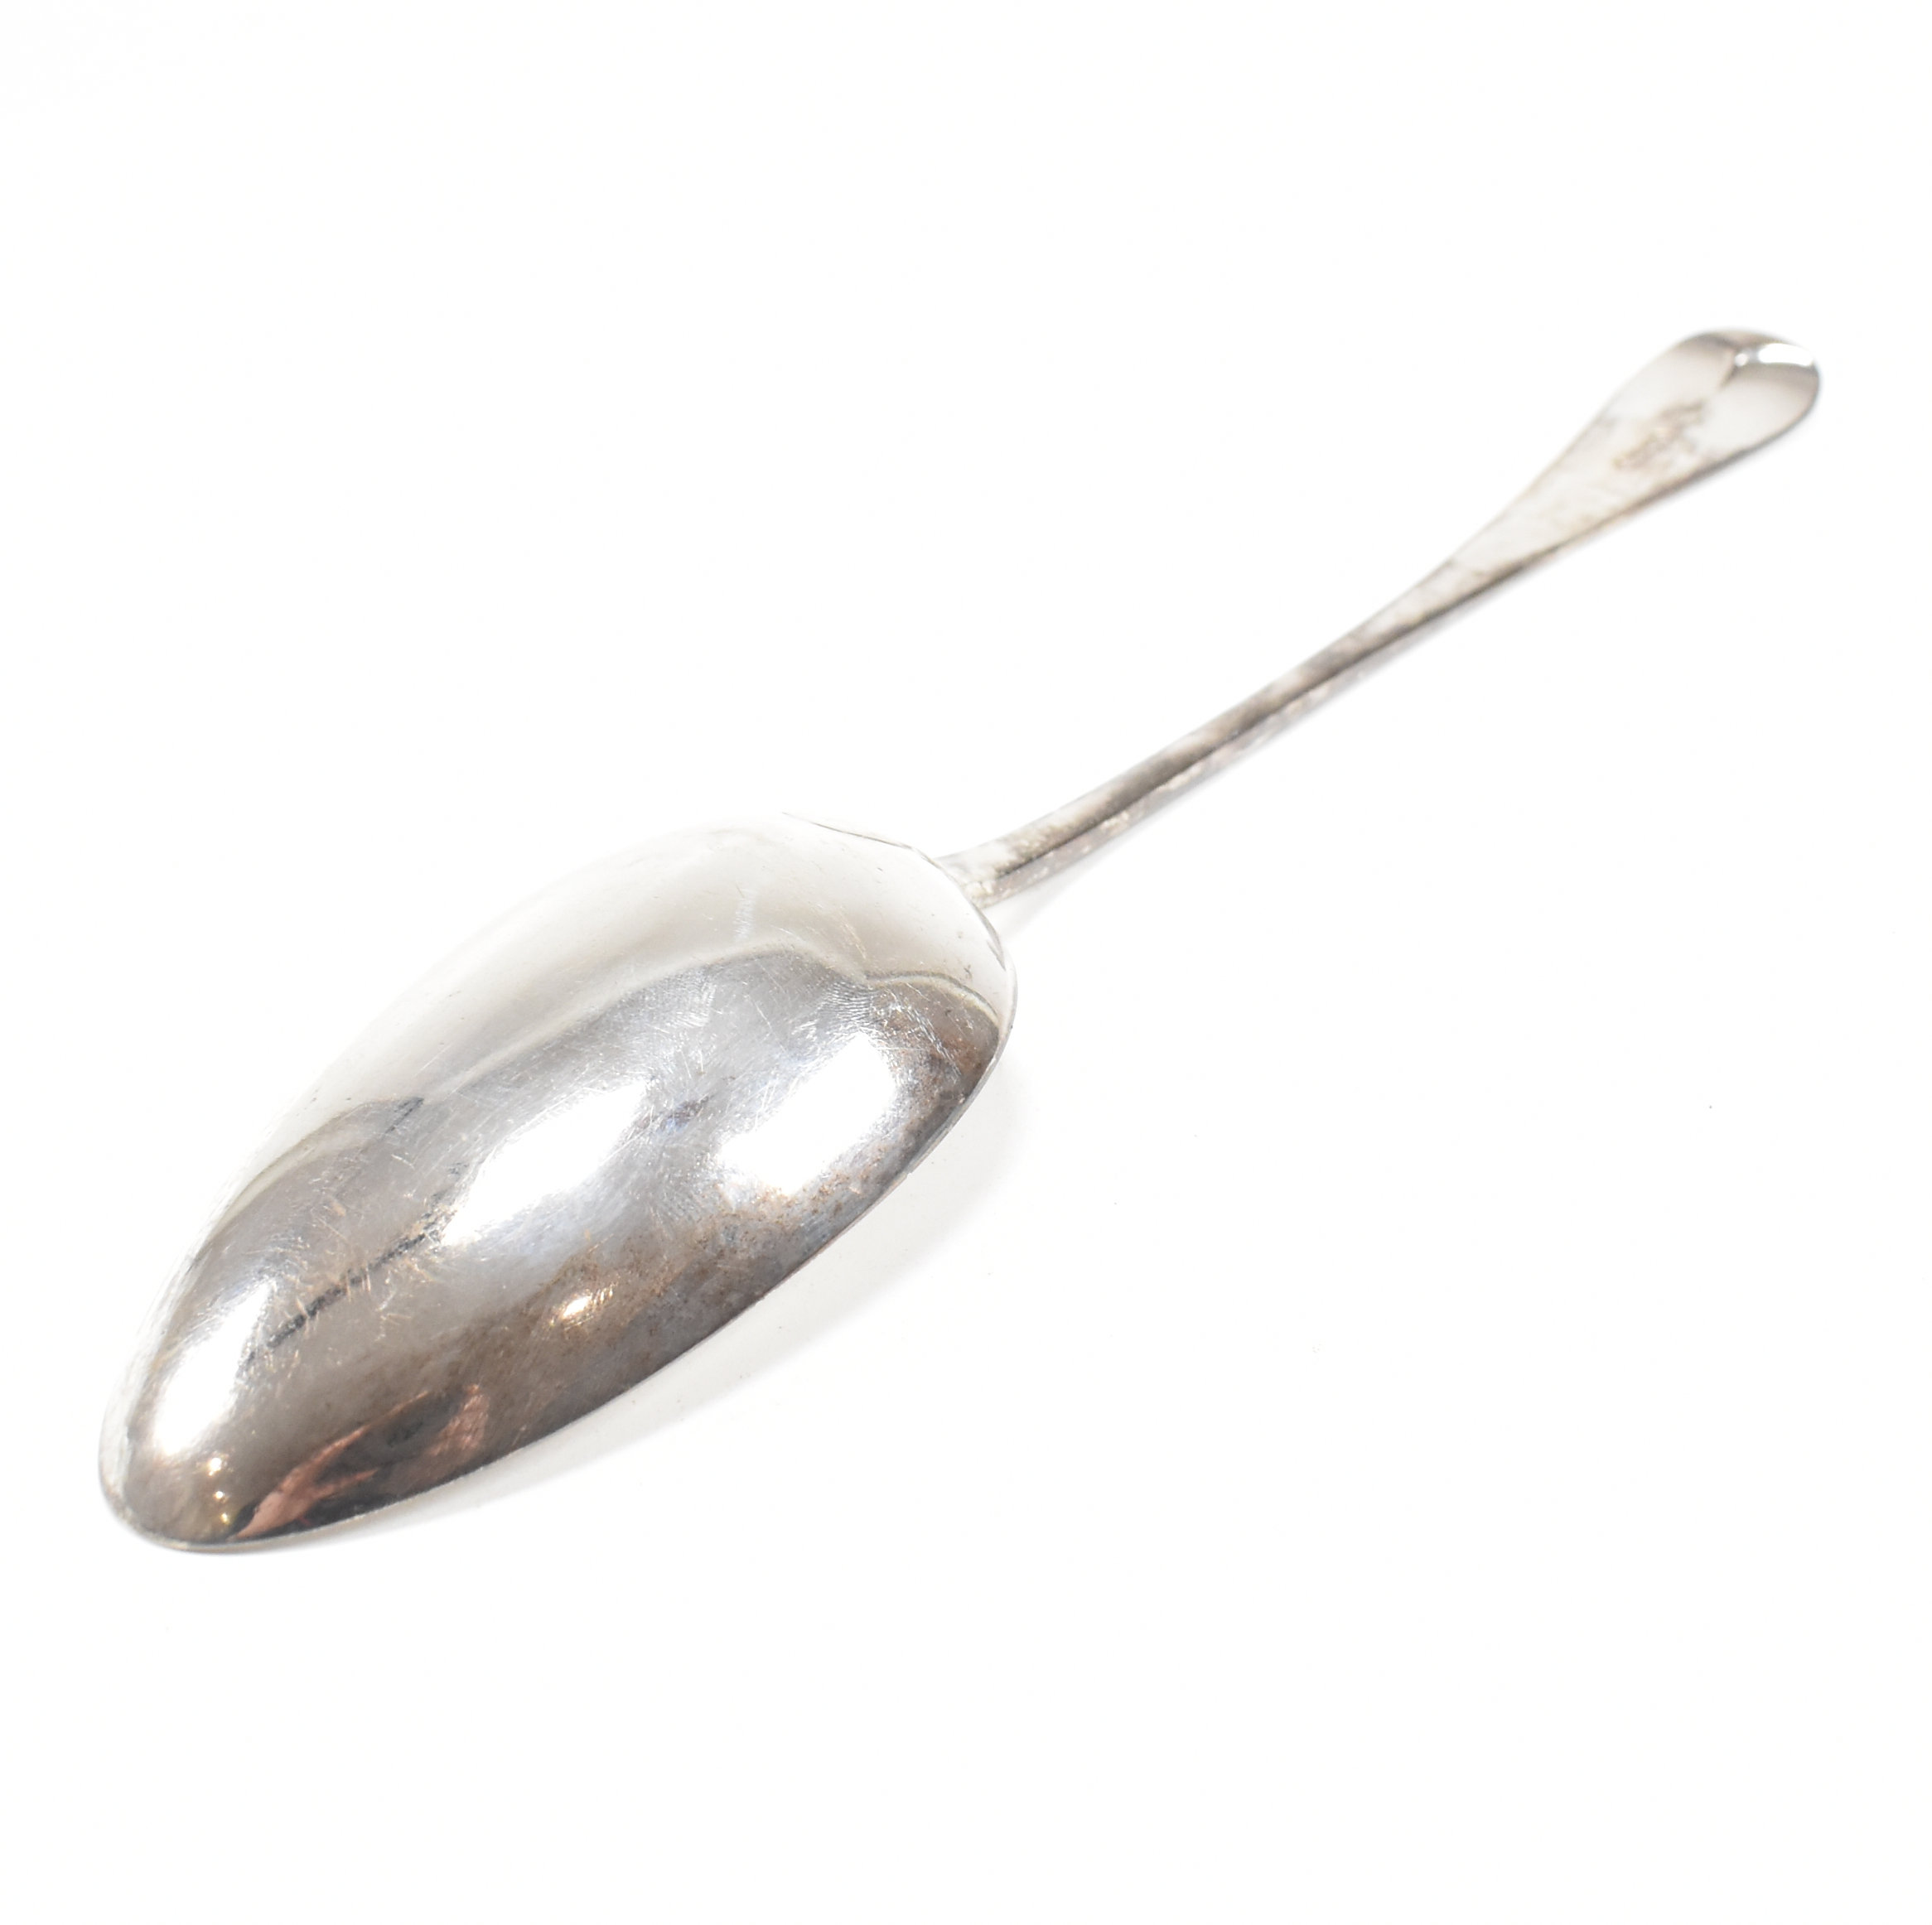 VICTORIAN HALLMARKED SILVER SERVING SPOON - Image 5 of 8